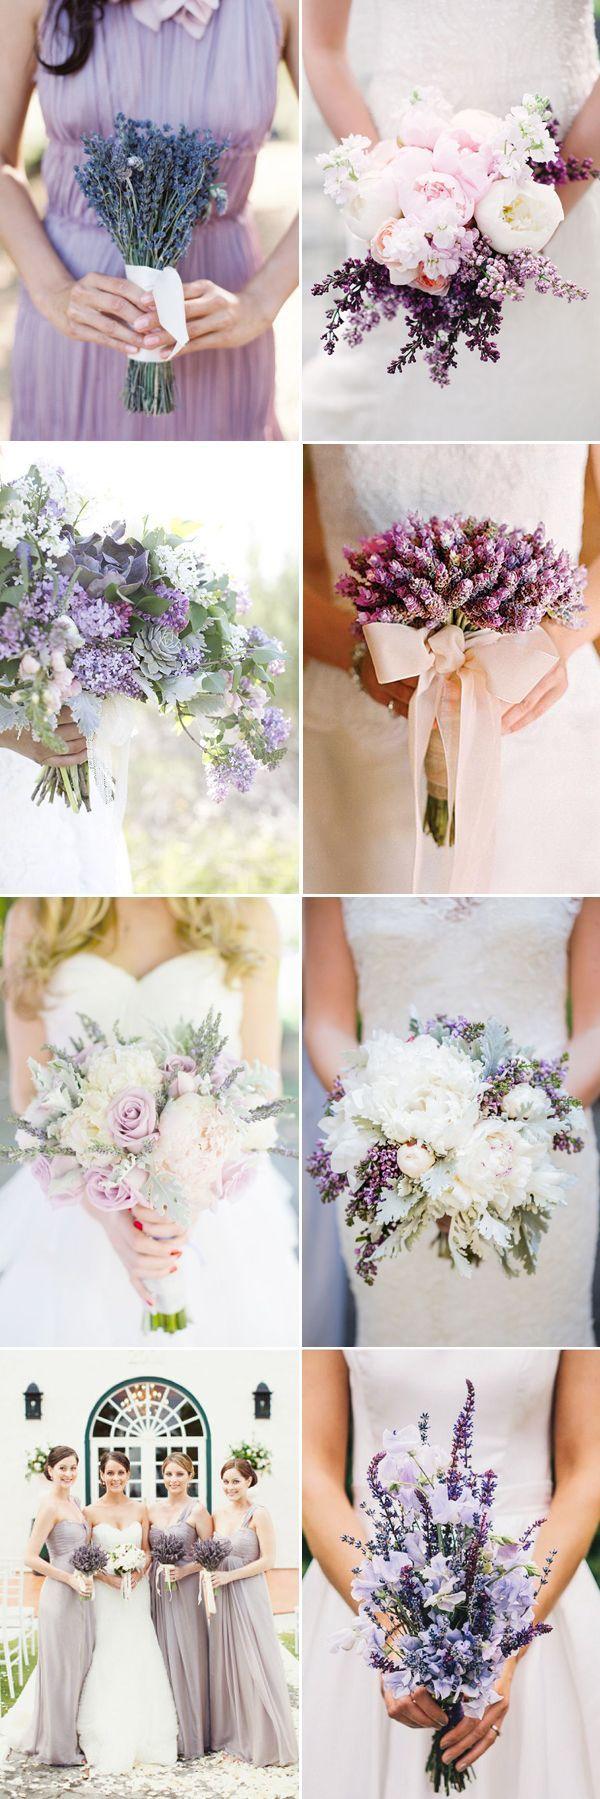 Mariage - 45 Romantic Ways To Decorate Your Wedding With Lavender